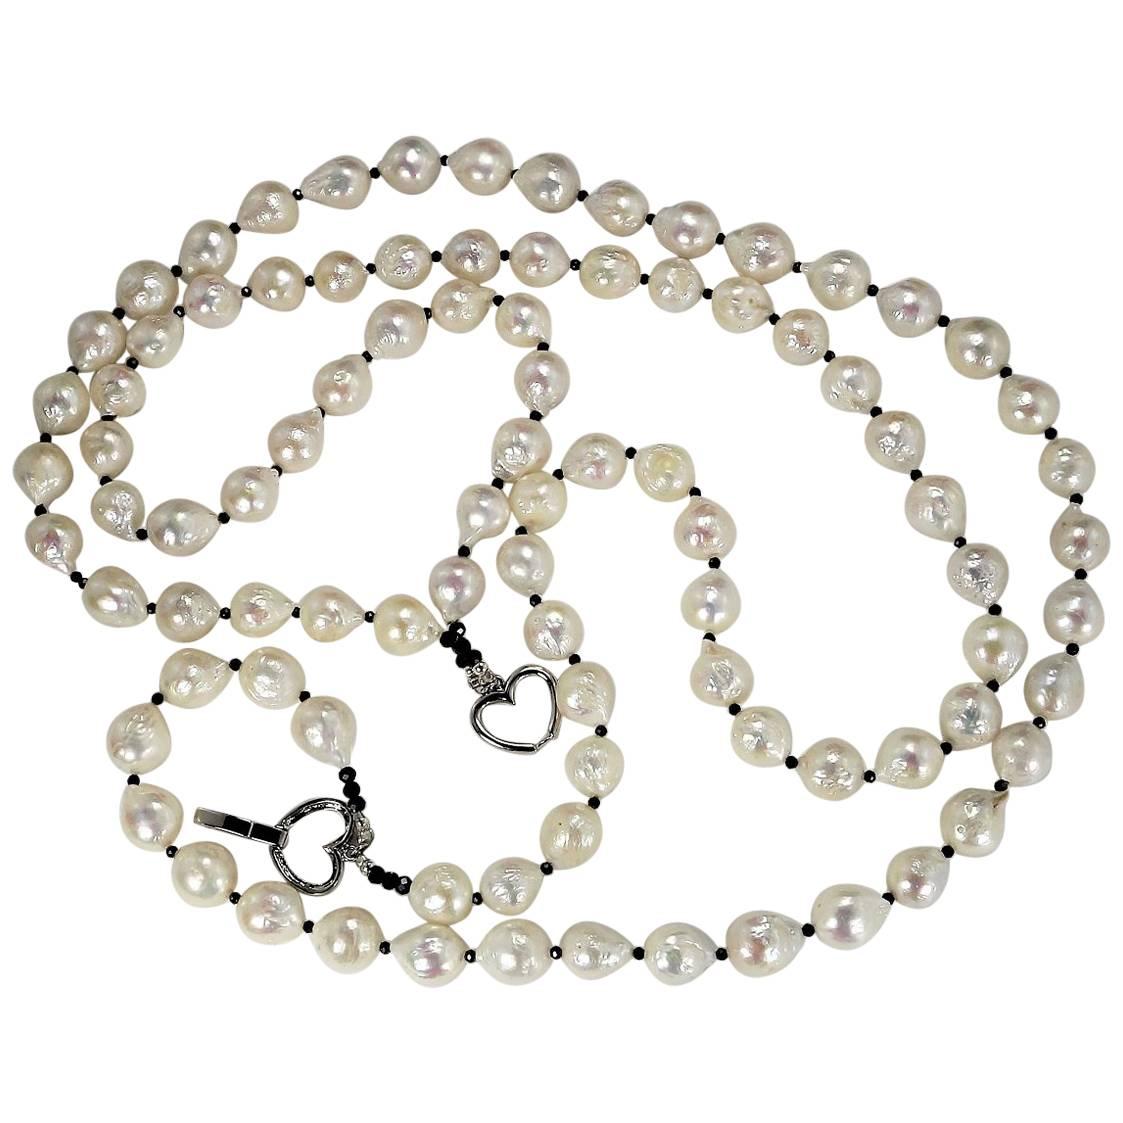 Double Strand White Fireball Pearl Necklace